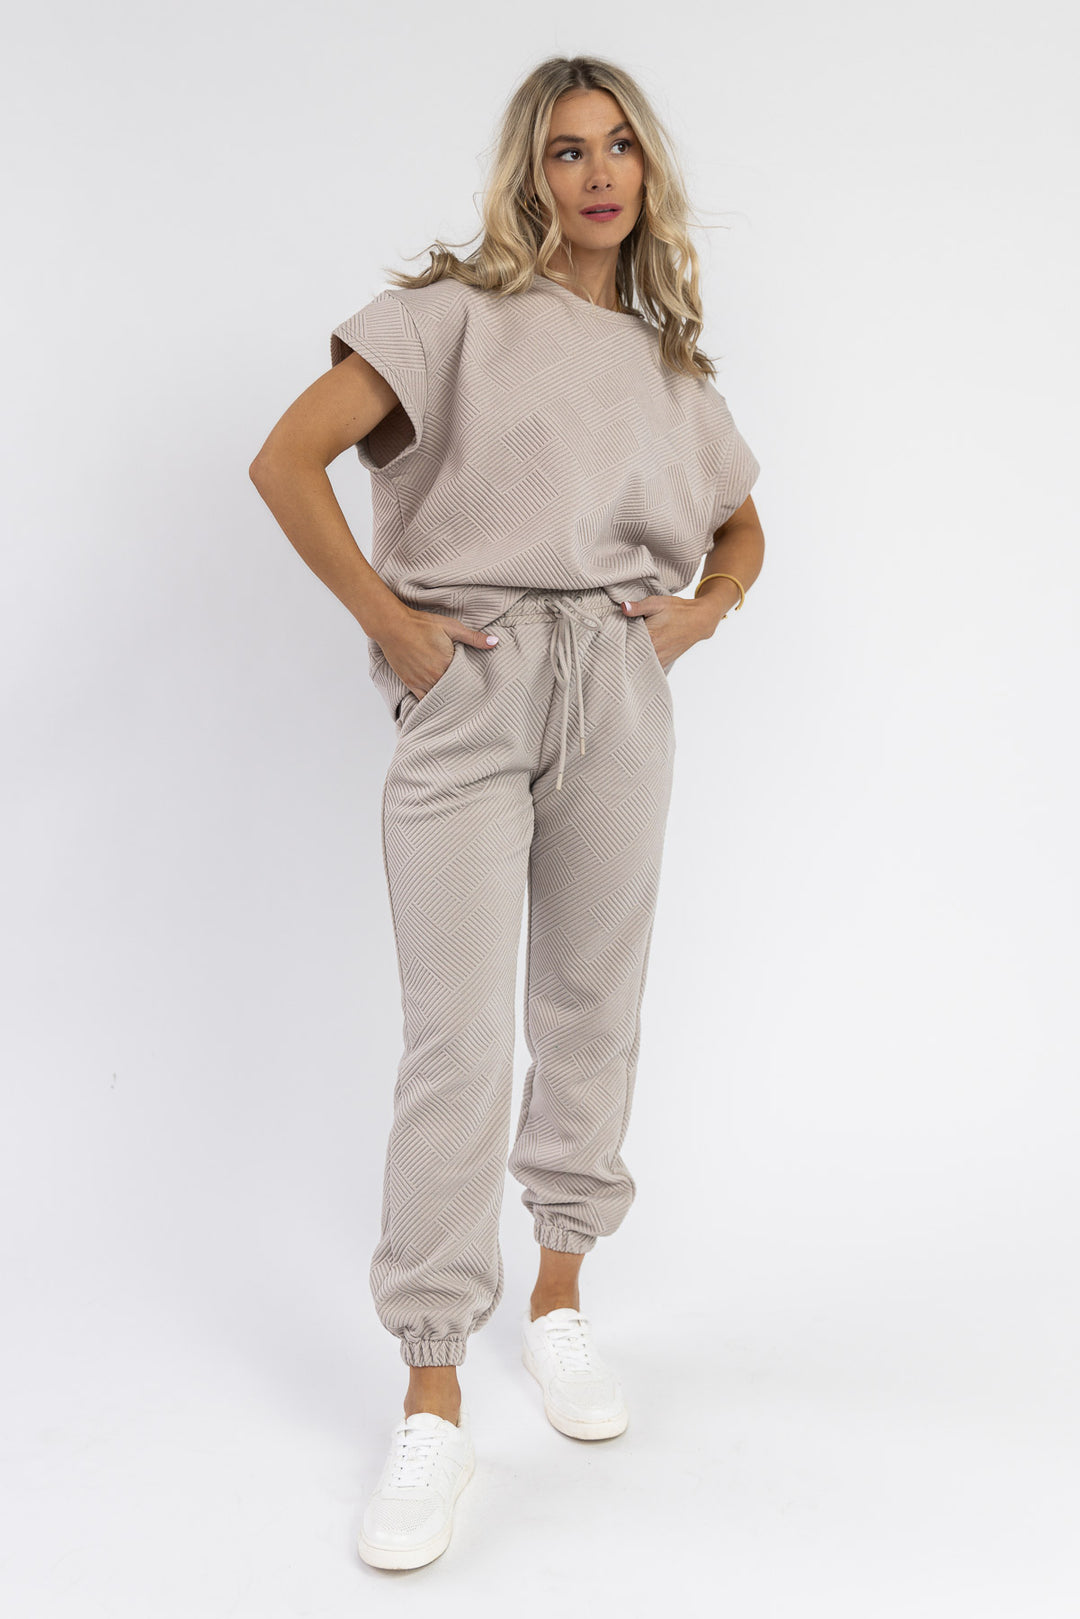 Weekend Vibe Textured Joggers in Grey, Chic Women's Fashion